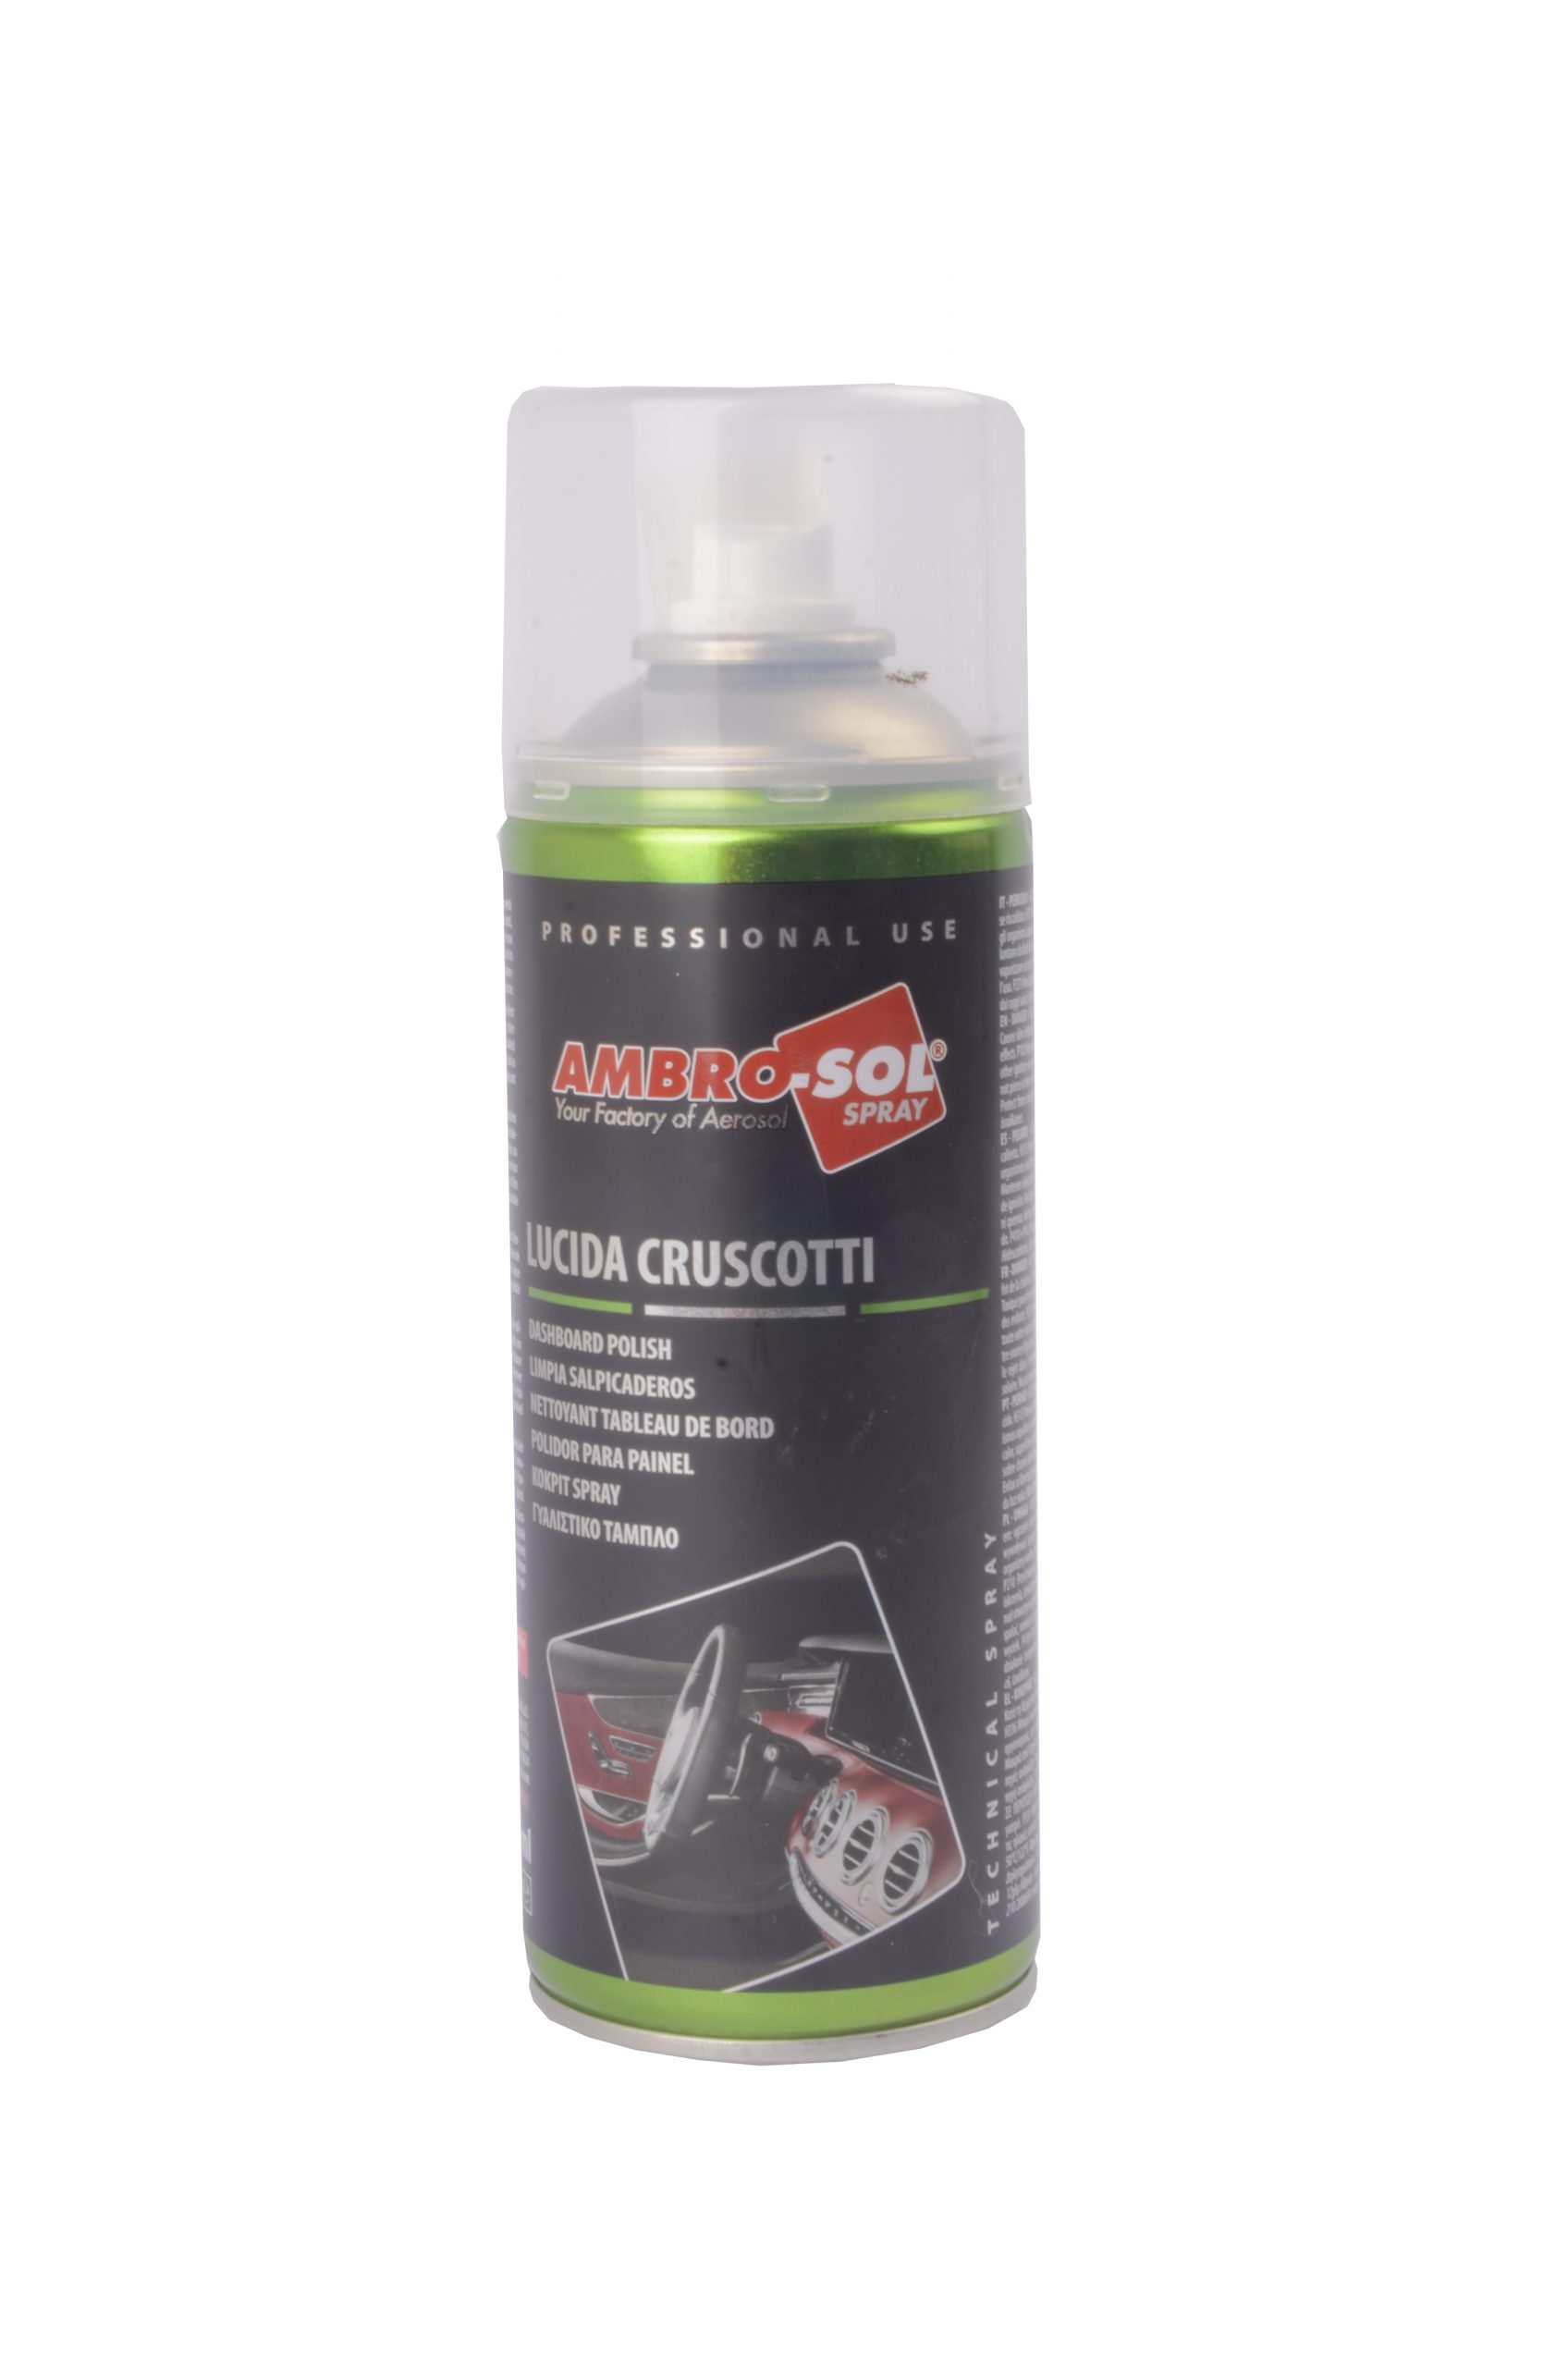 Ambrosol 
	
	Dashboard/Cockpit Polish Cleaner
	 |  Hardware and Tools |  Vehicle Cleaning |  Industrial Sprays |  Vehicle Supplies